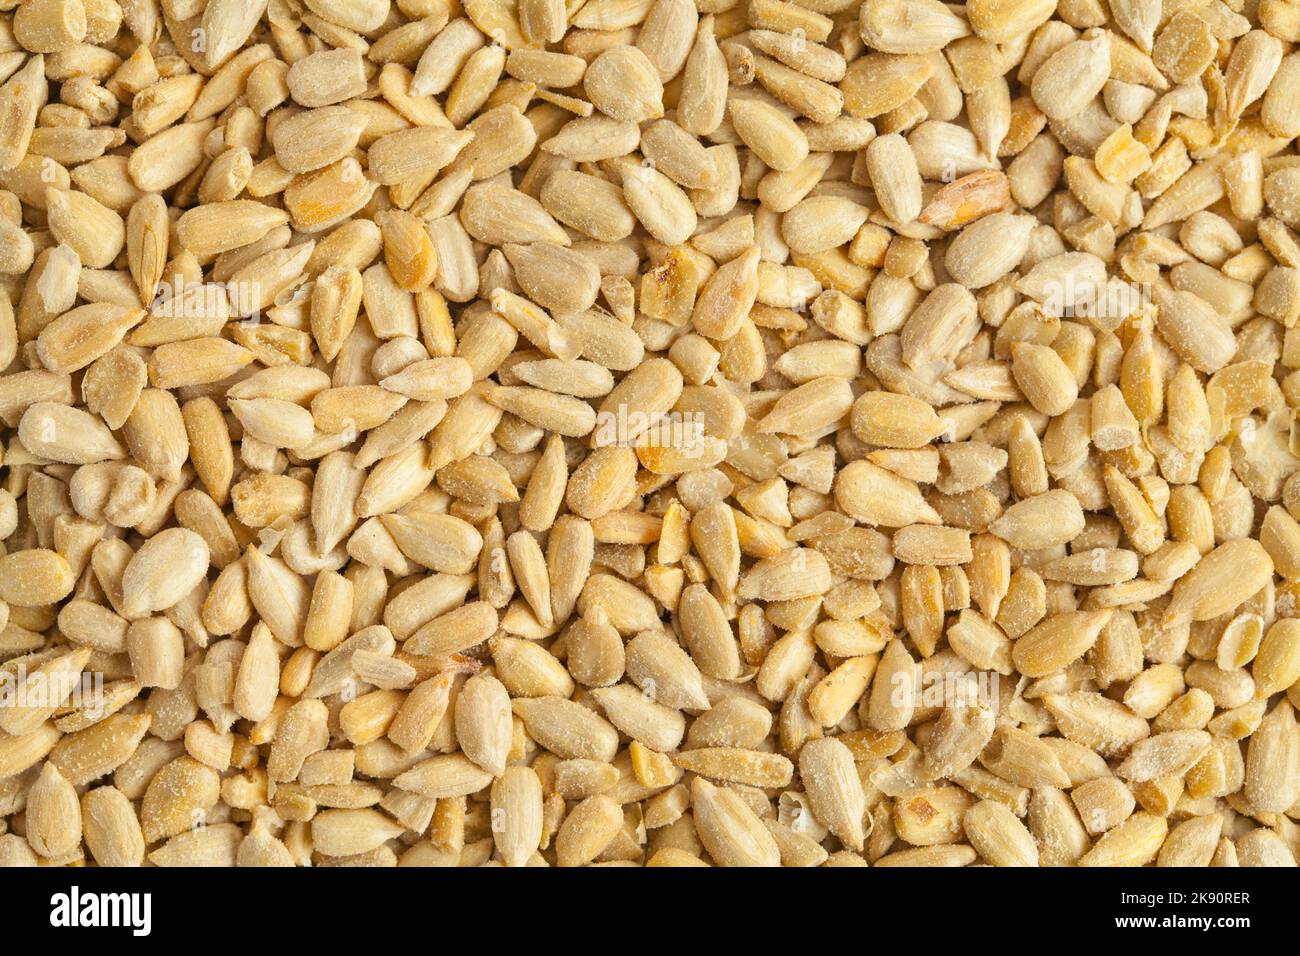 Large Pile Of Sunflower Seeds Background Texture. Stock Photo